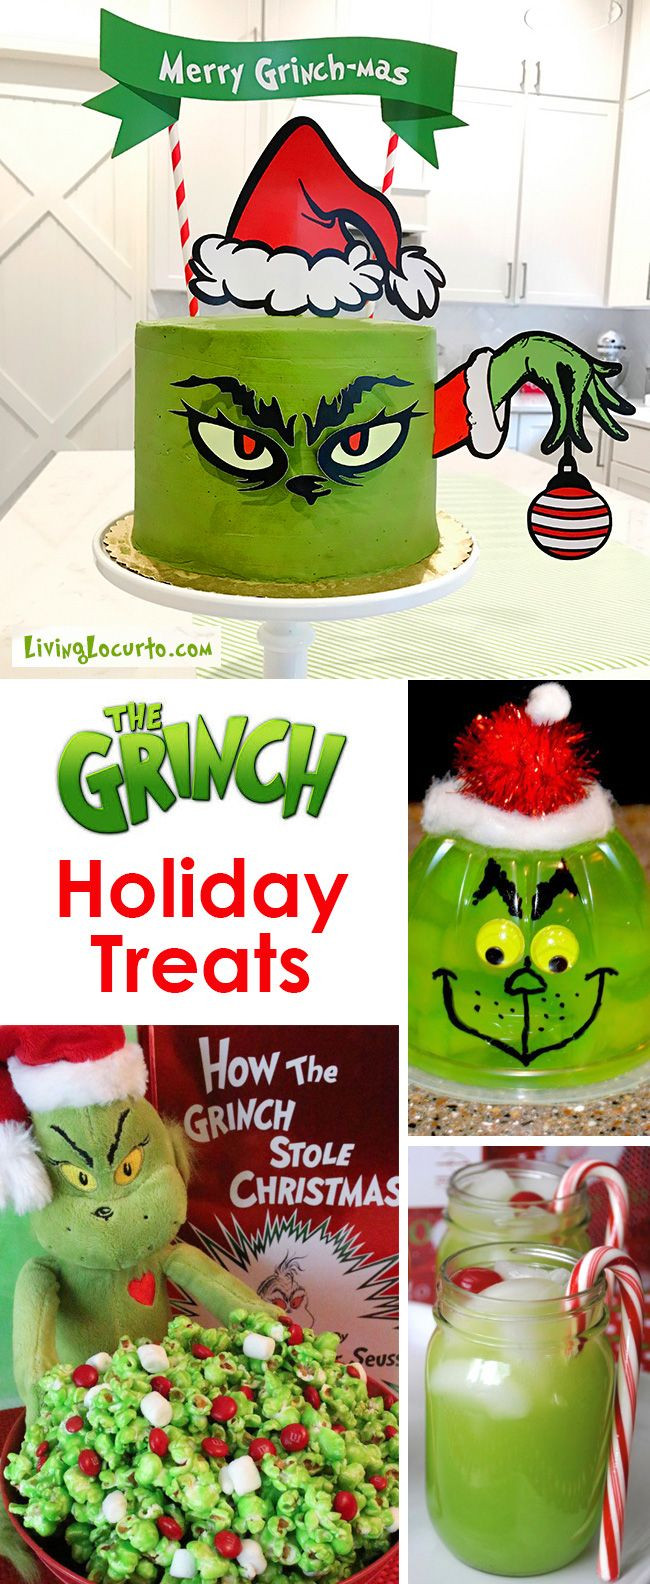 School Holiday Party Food Ideas
 The BEST Grinch Christmas Party Recipes